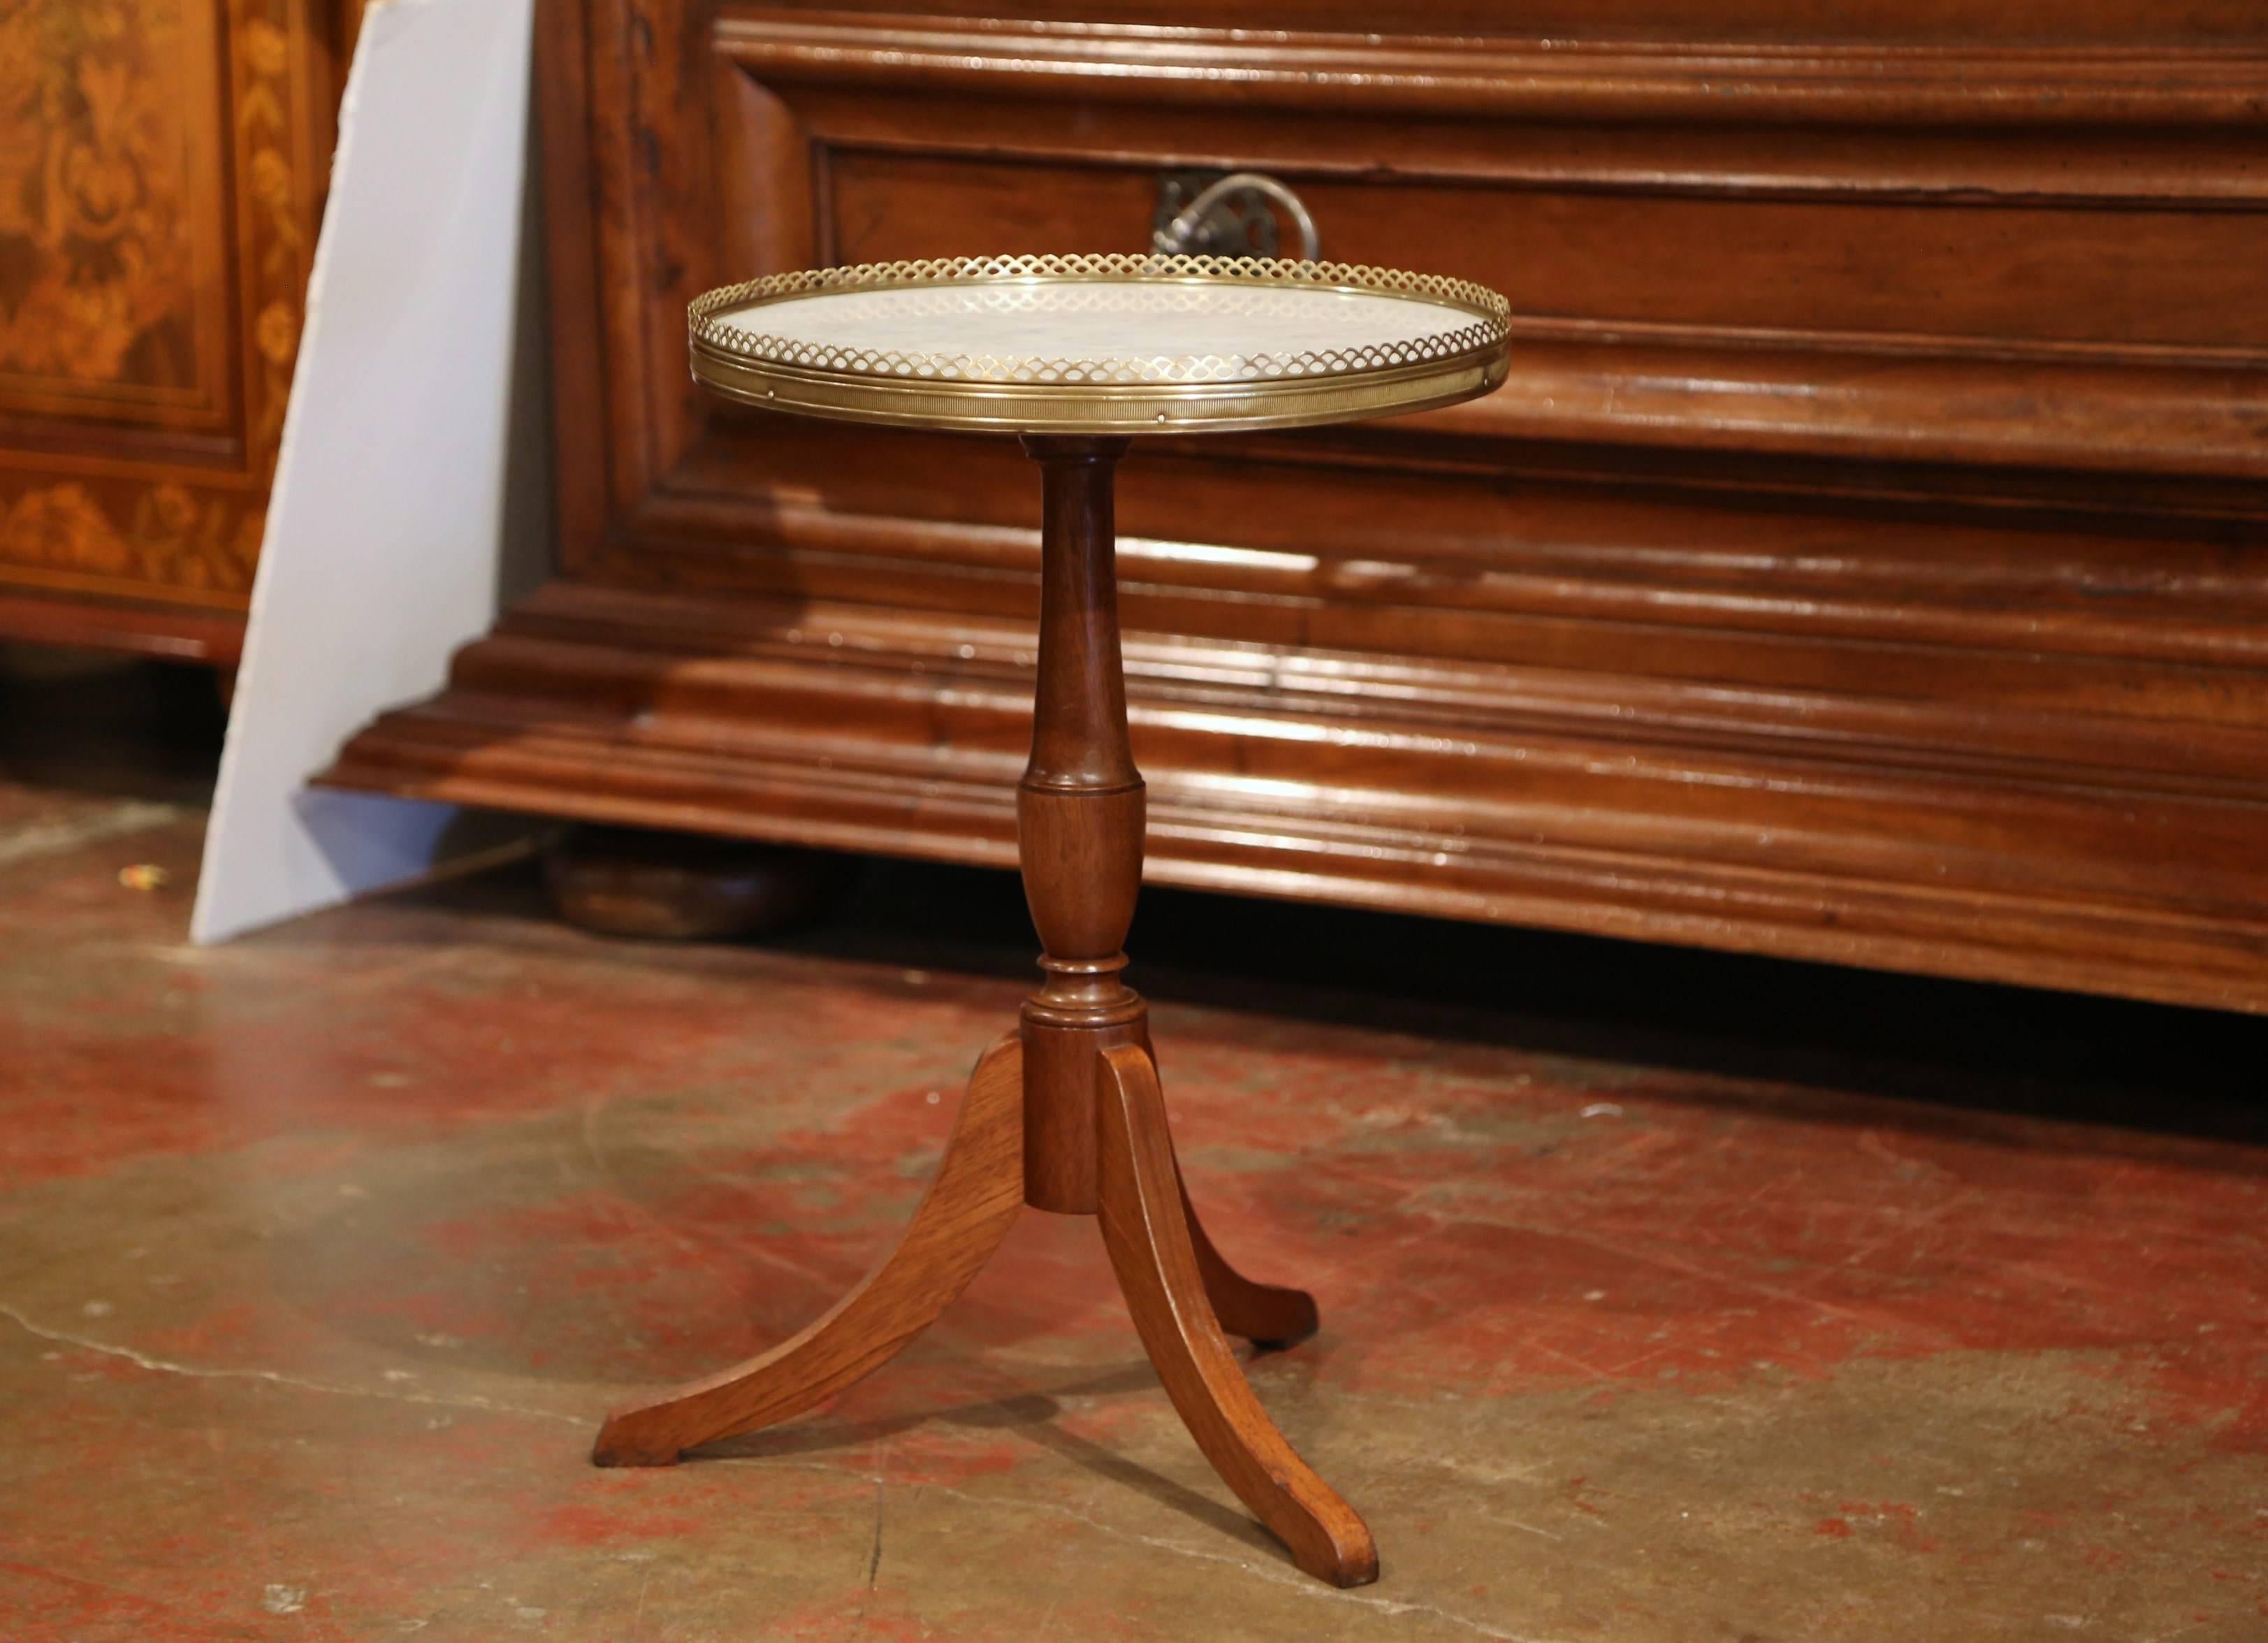 This elegant side table was crafted in France, circa 1890; sited on a carved pedestal with three legs, the small fruit wood table features a brass gallery rim with white marble inset. Excellent condition with rich walnut patina.
Measures: 14